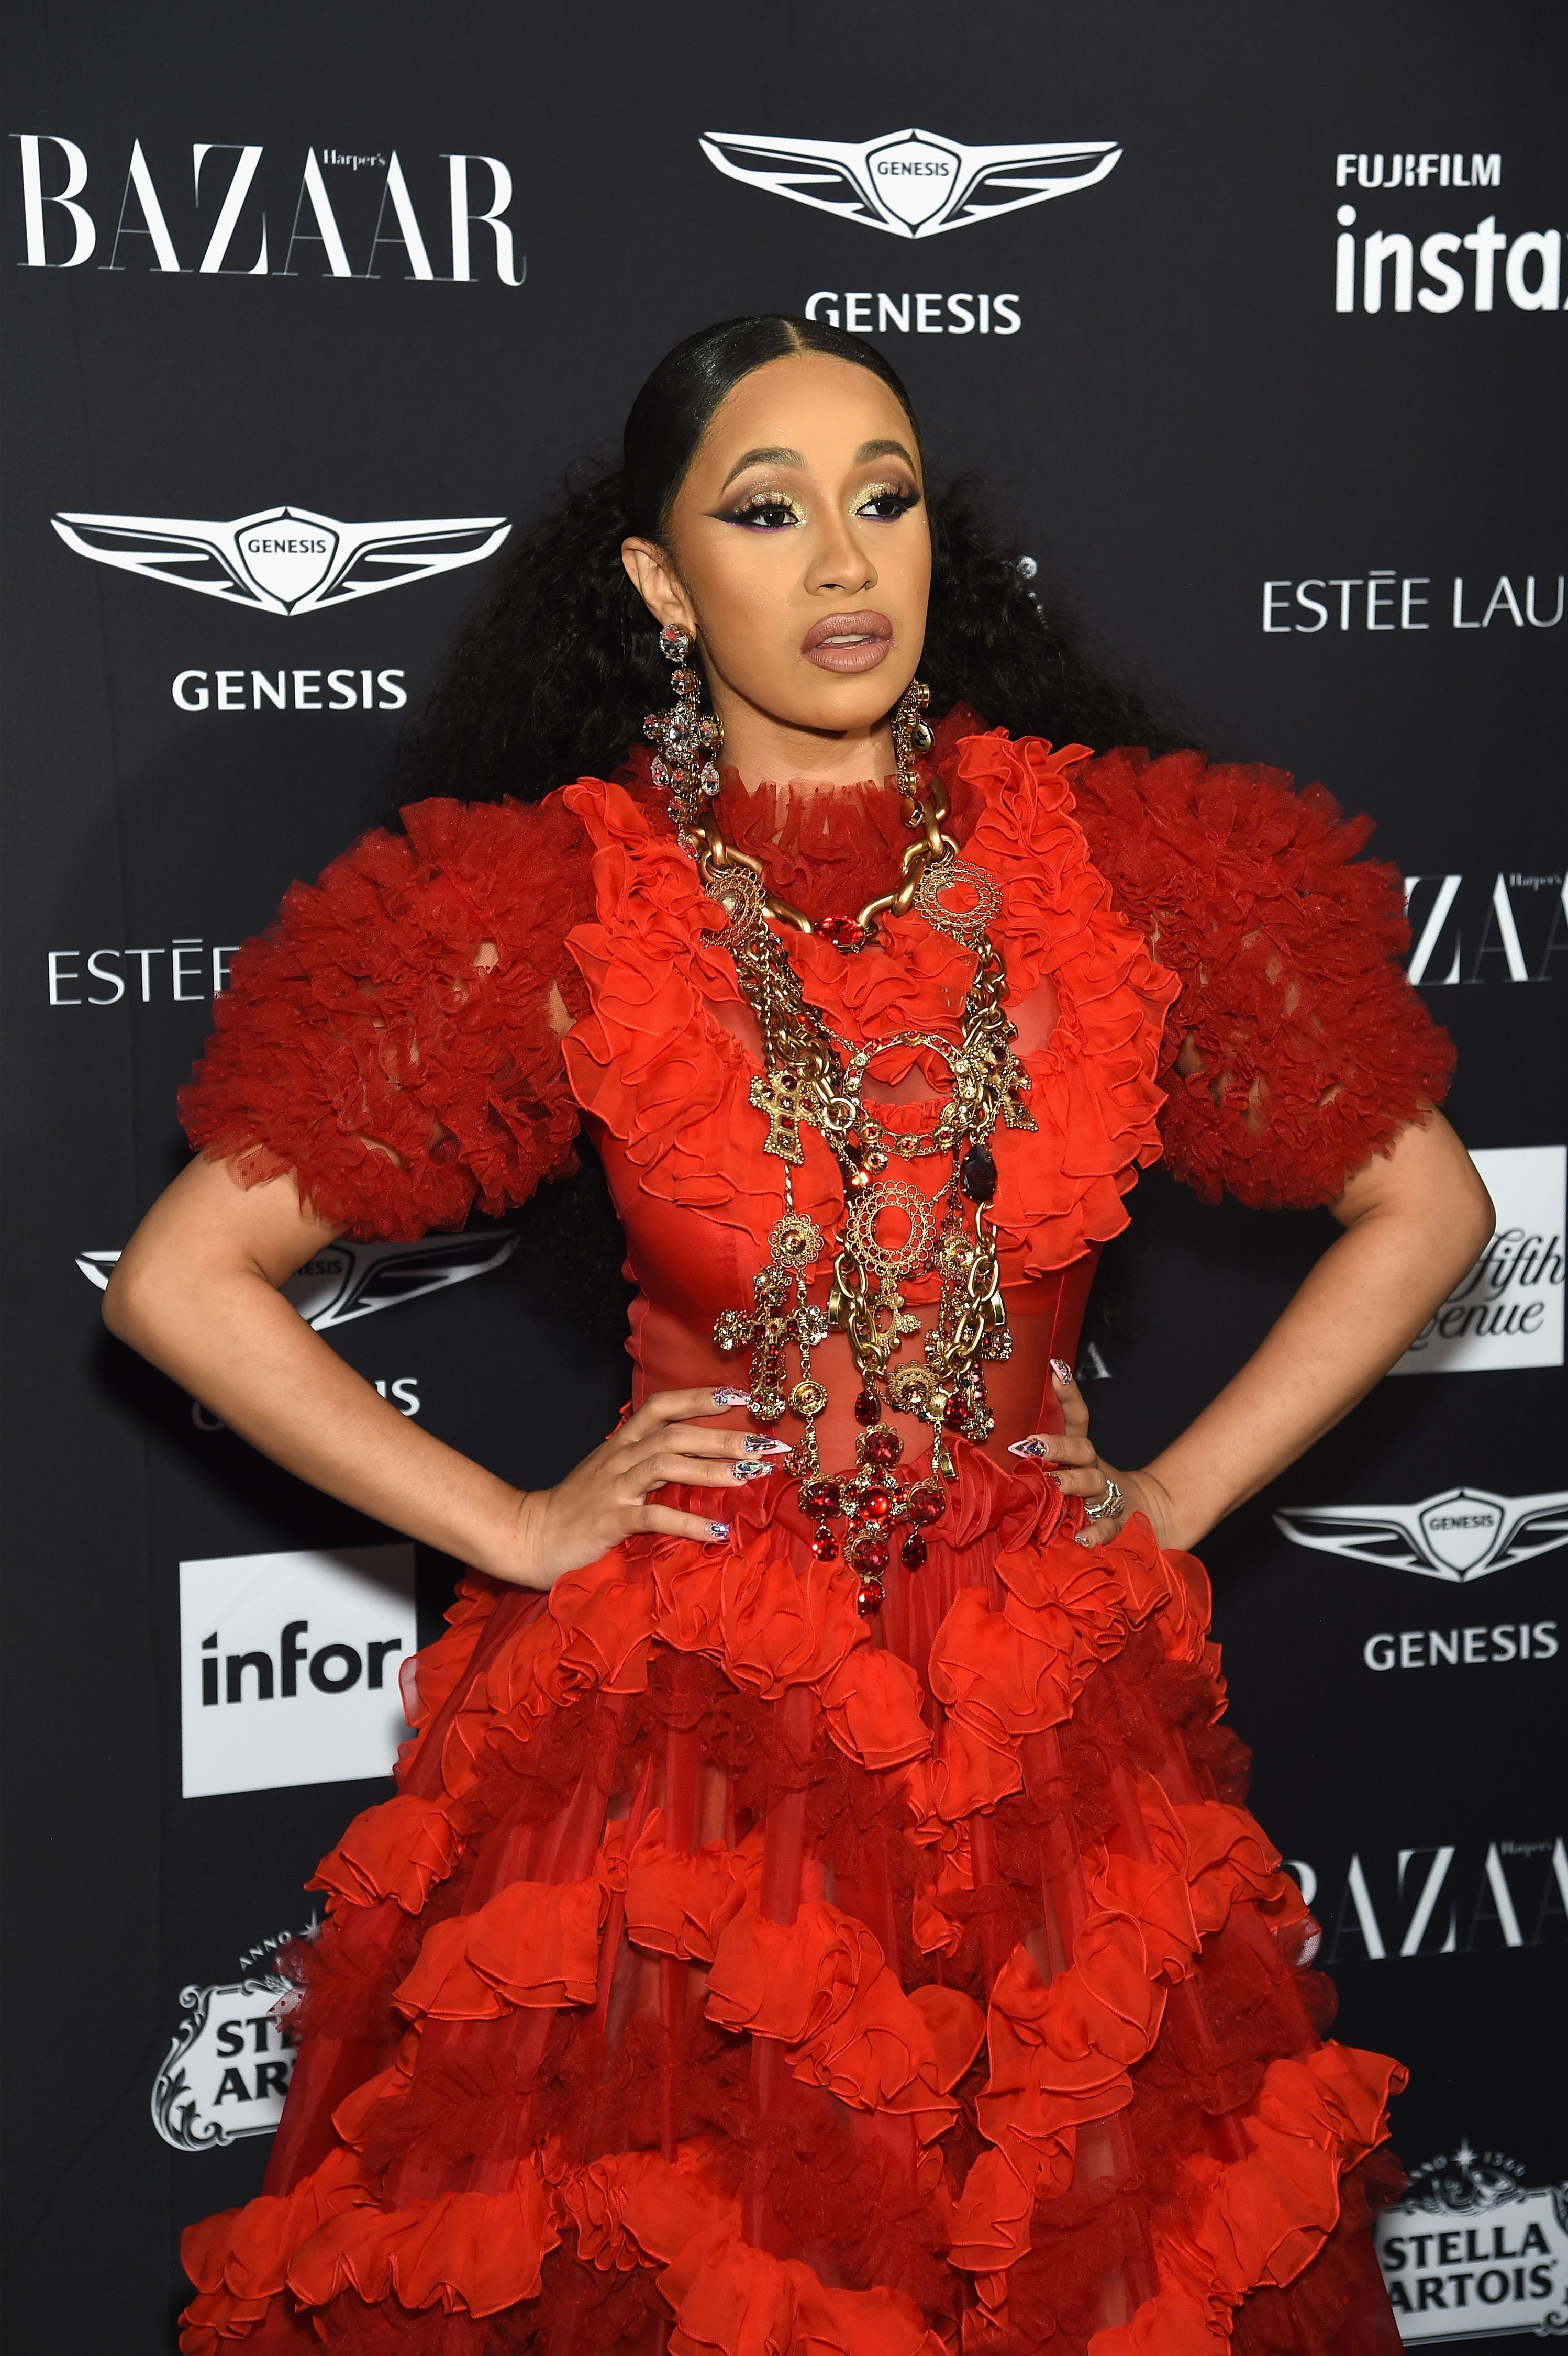 Rapper Cardi B at the Plaza Hotel in September 2018 in NY attending Harper's Bazaar's commemoration of "ICONS By Carine Roitfeld". | Photo: Getty Images